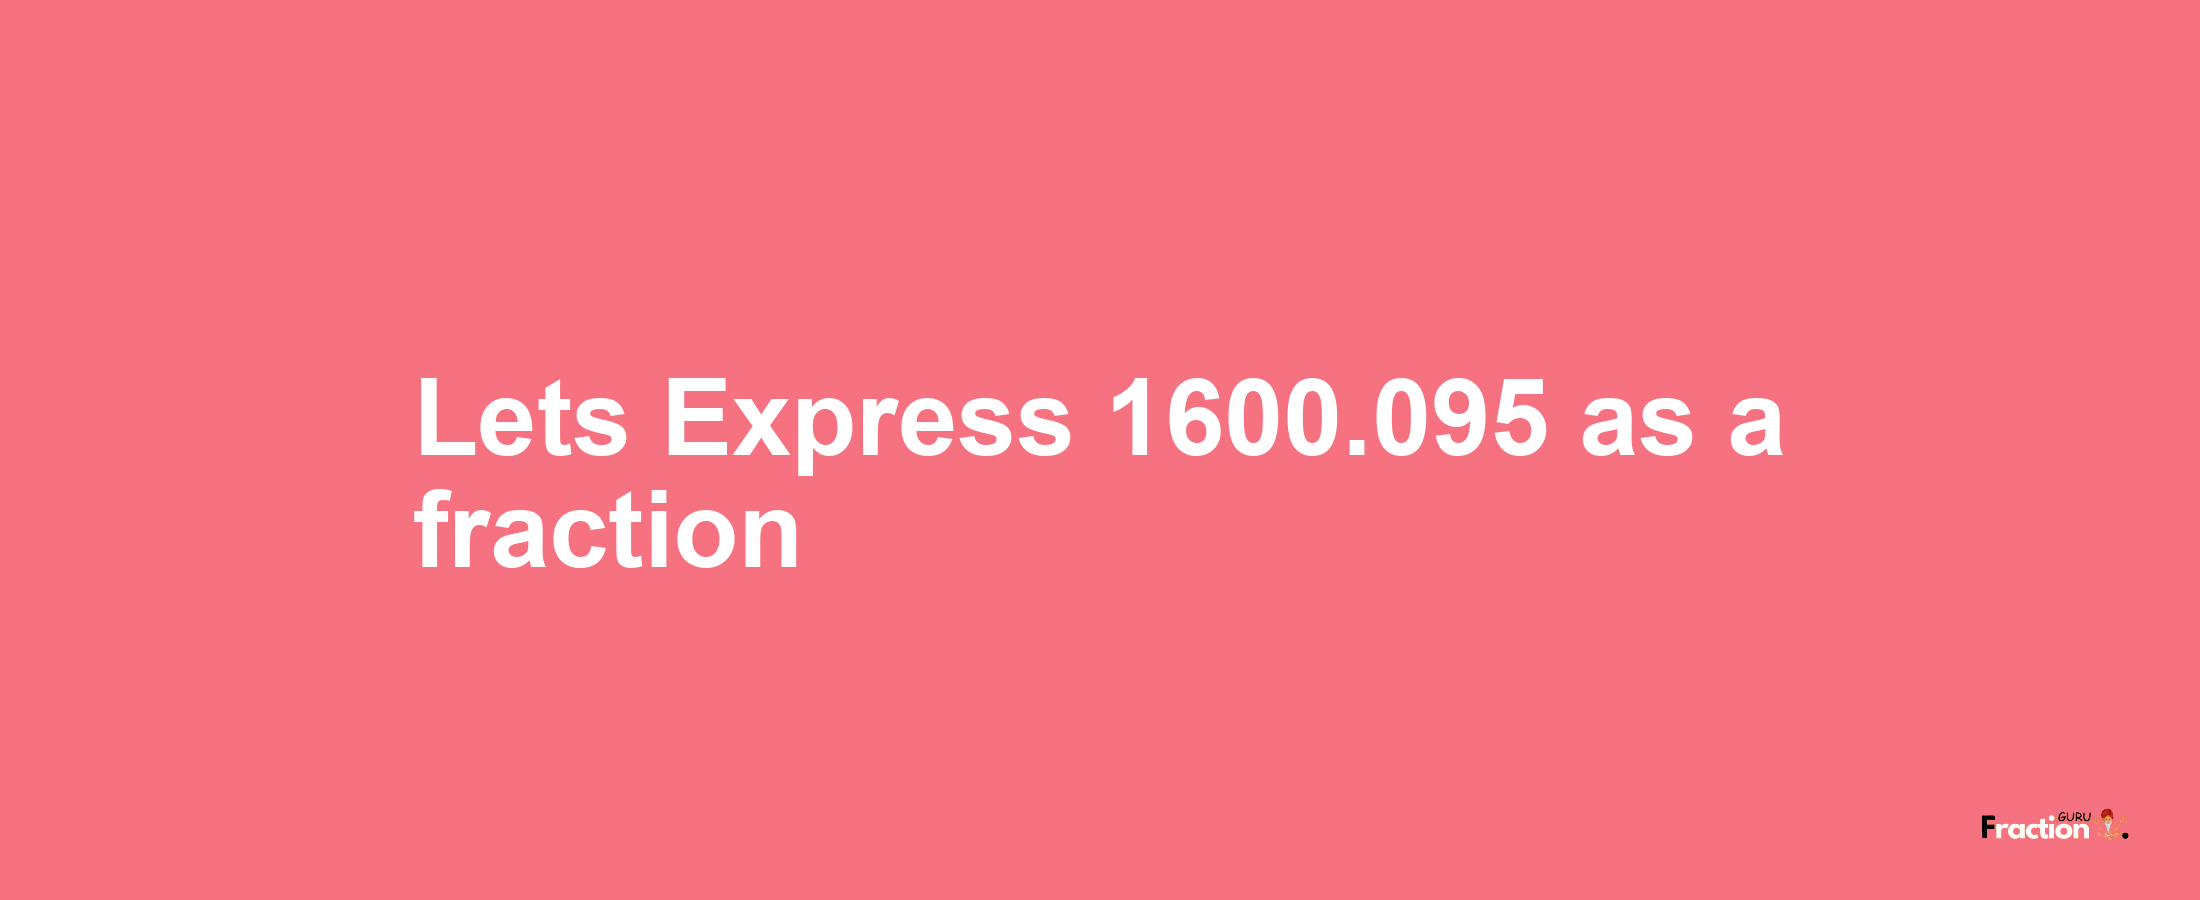 Lets Express 1600.095 as afraction